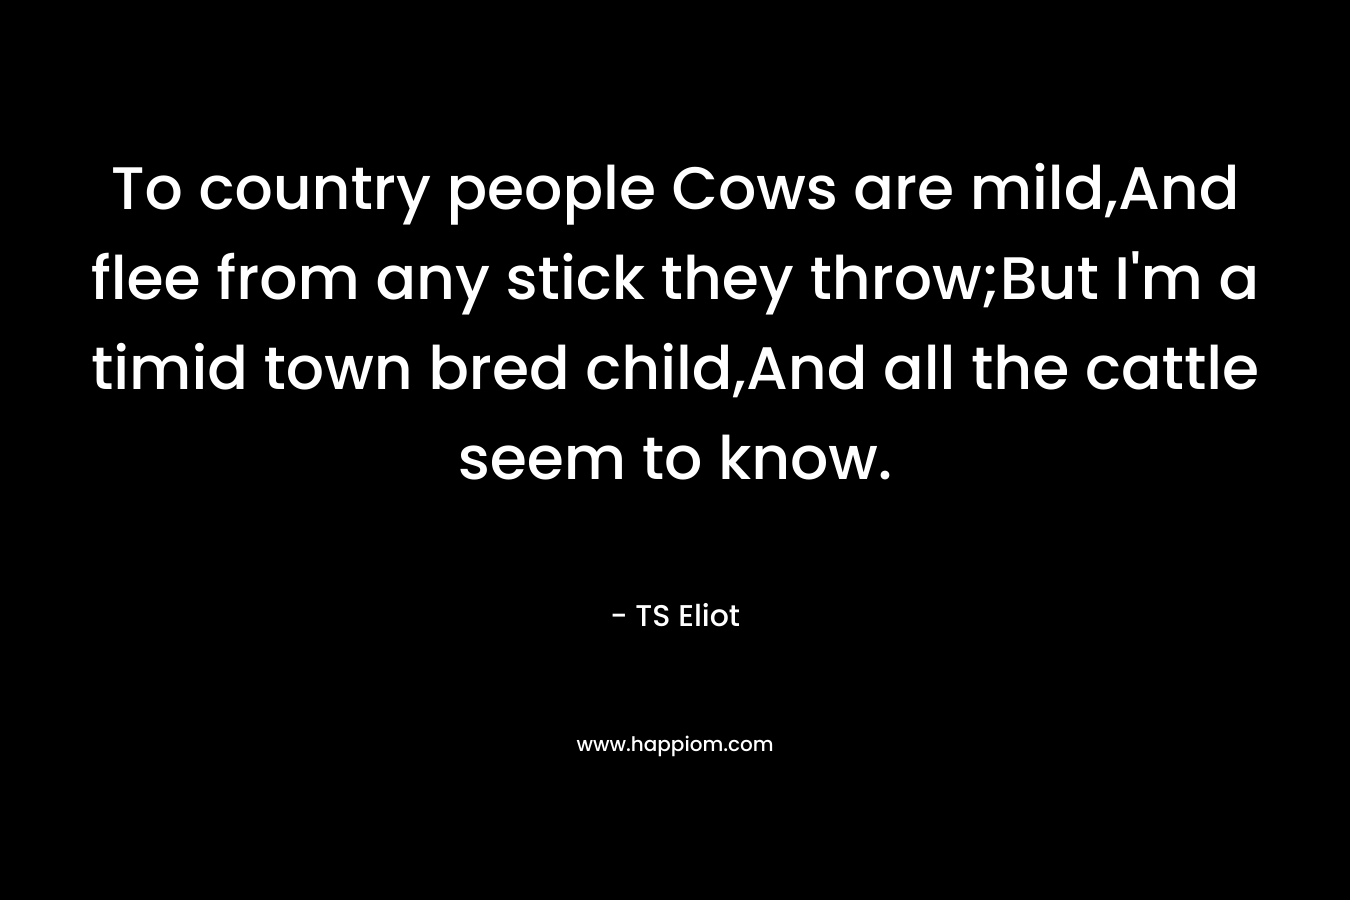 To country people Cows are mild,And flee from any stick they throw;But I’m a timid town bred child,And all the cattle seem to know. – TS Eliot